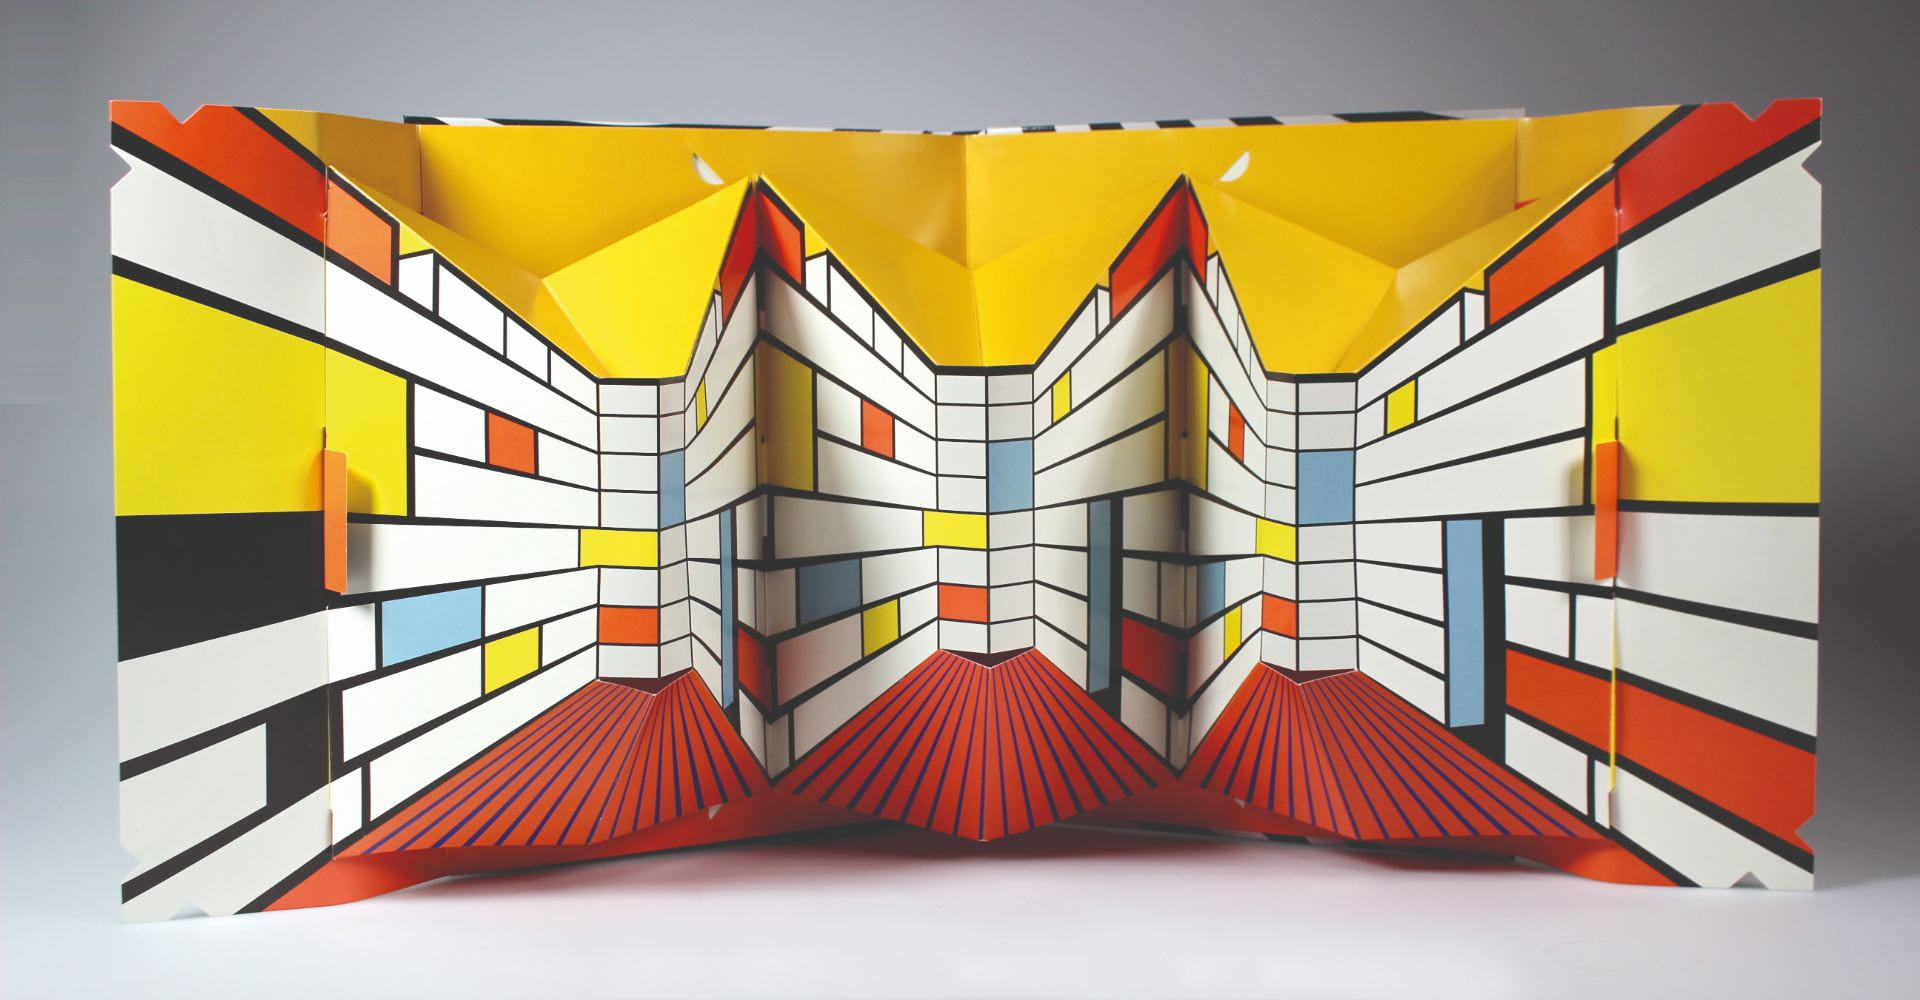 ‘Optical Illusions’ Information Pop-Up Book, Project Art Editor & Paper Engineer Jemma Westing